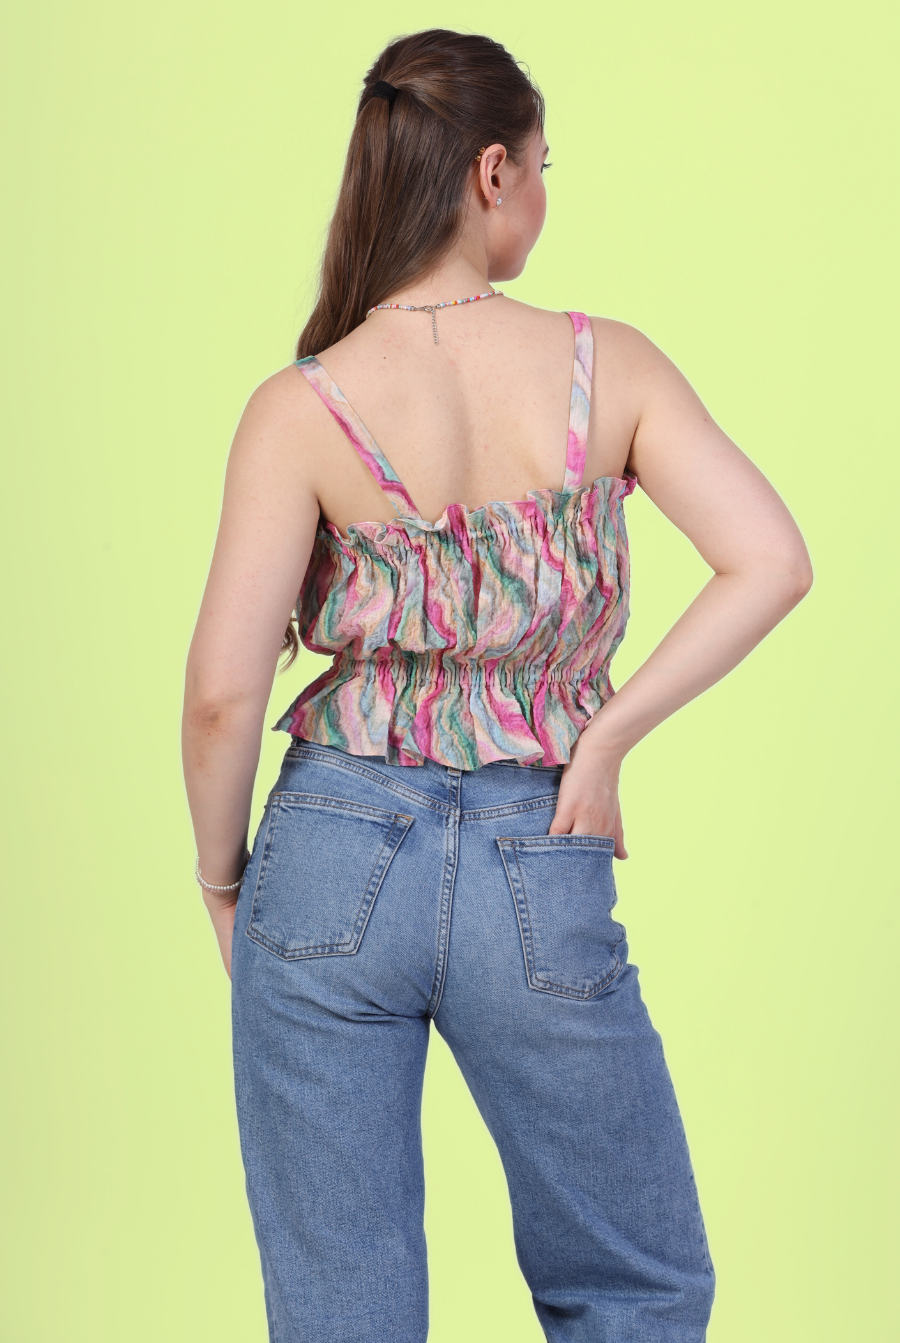 Back pose of woman wearing a strappy ruffle top with blue jeans